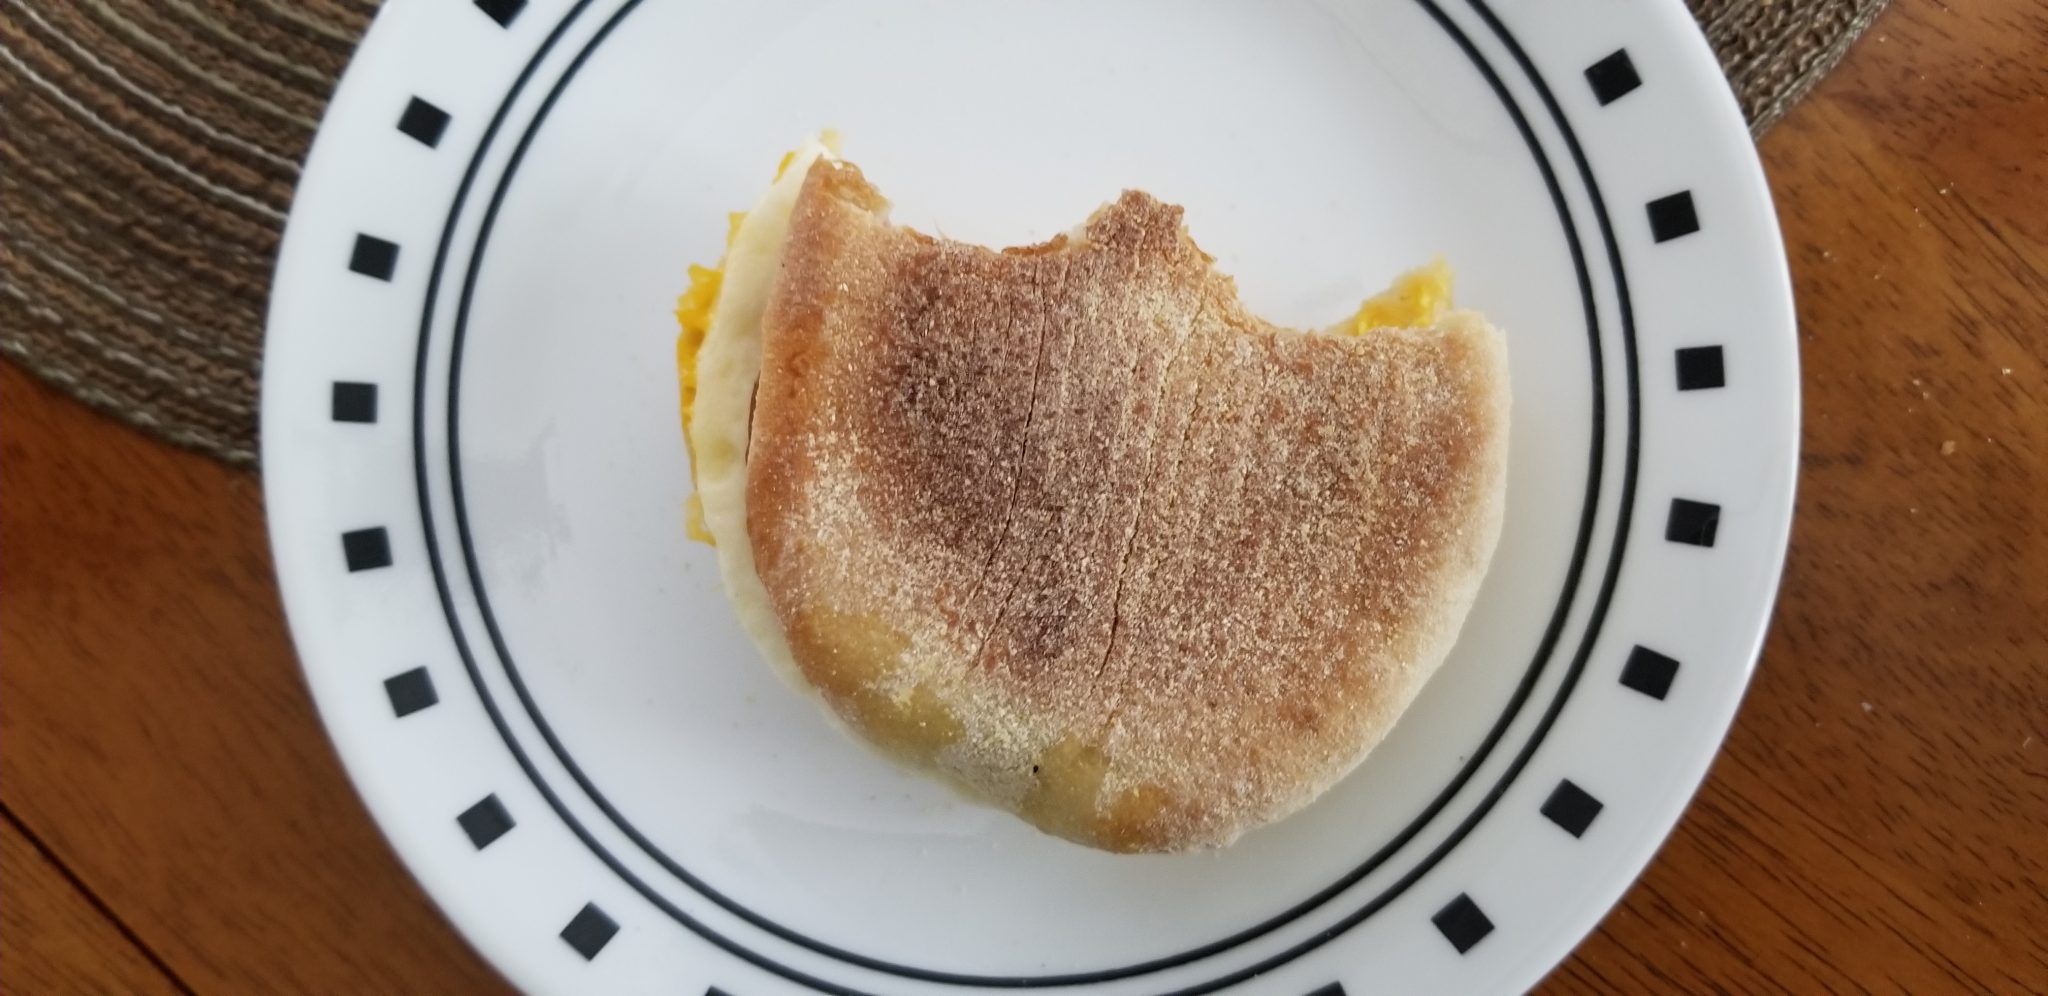 Jimmy Dean English Muffin, Canadian Bacon, Whole Egg and Cheese with two bites up close.